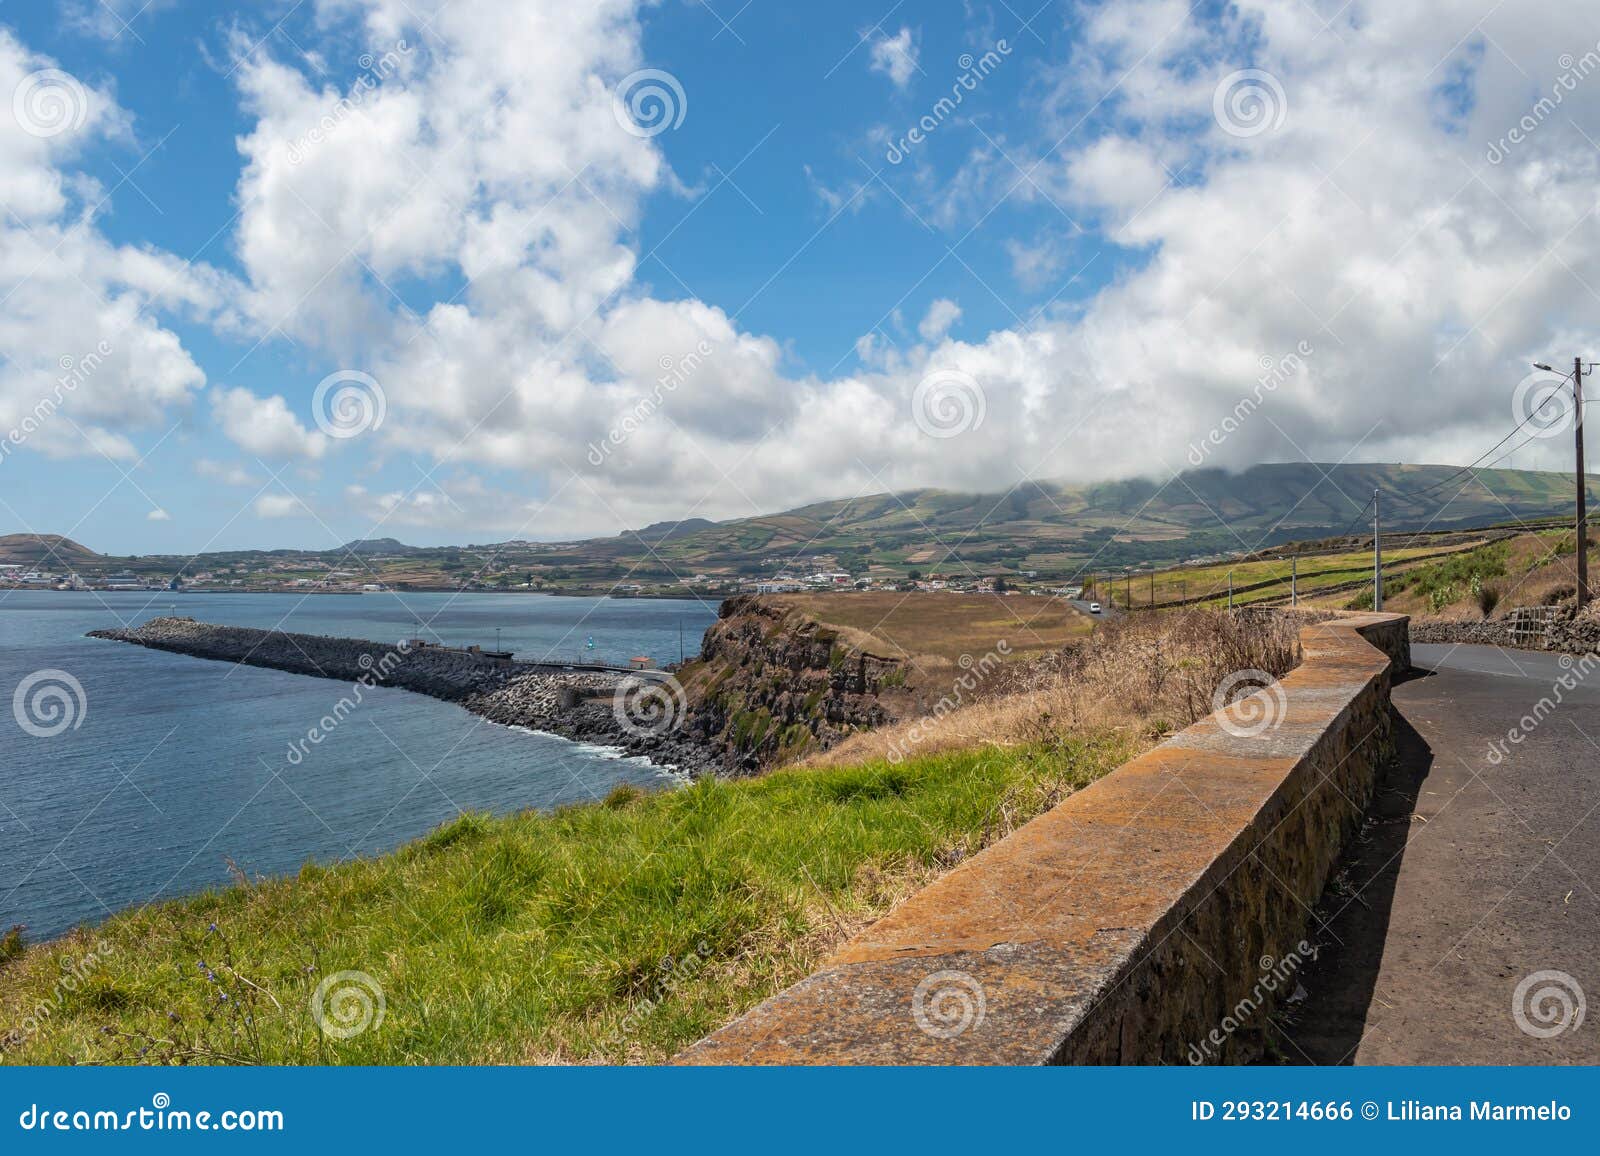 grass and blurred wall on cliff overlooking vitÃ³ria beach, terceira - azores portugal